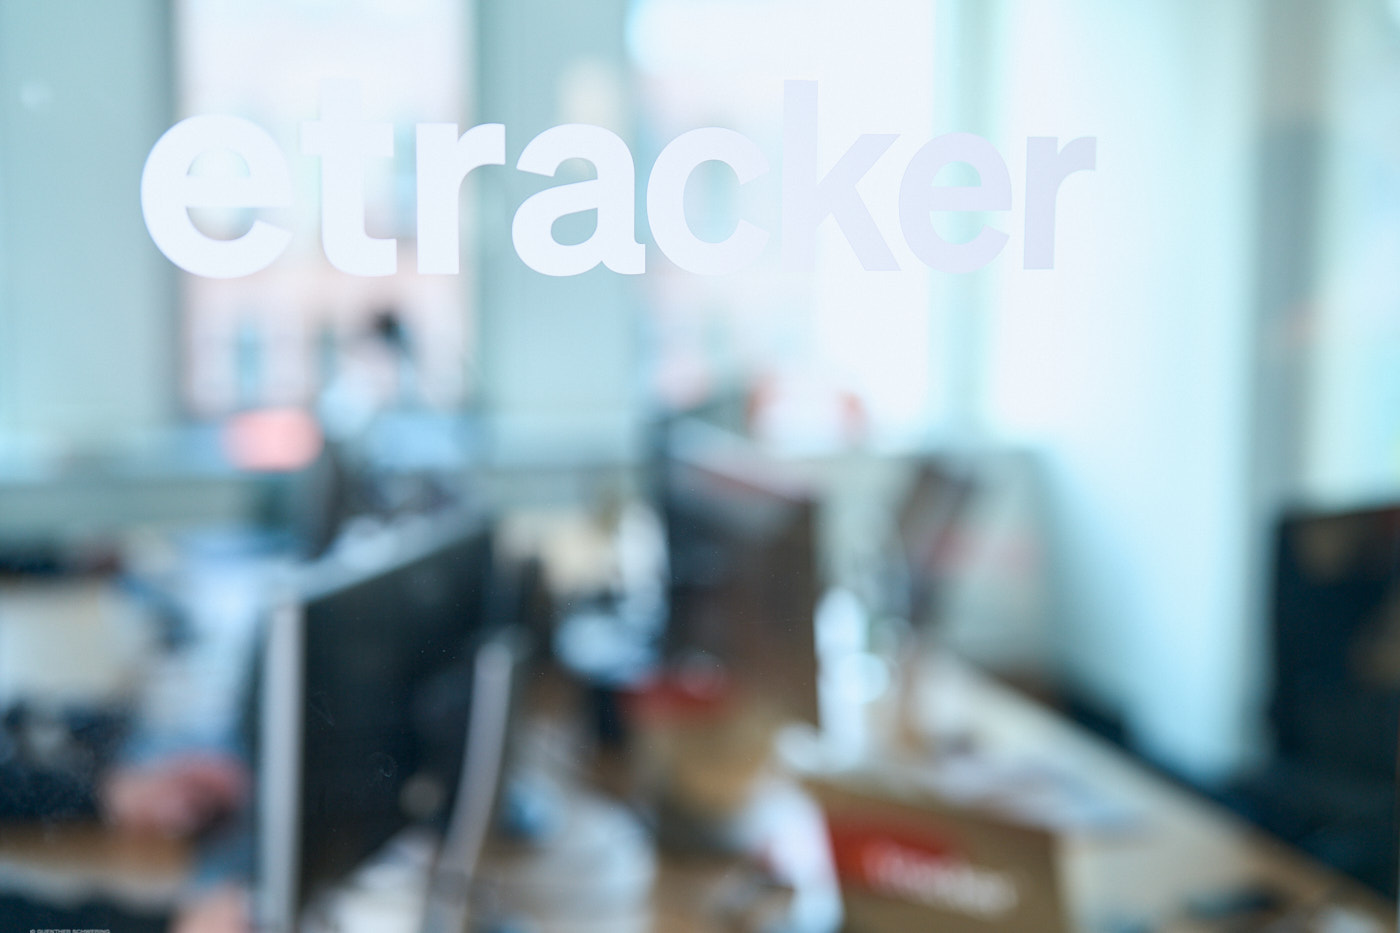 Preview image of website "etracker | The Google Analytics alternative 'Made in Germany'"